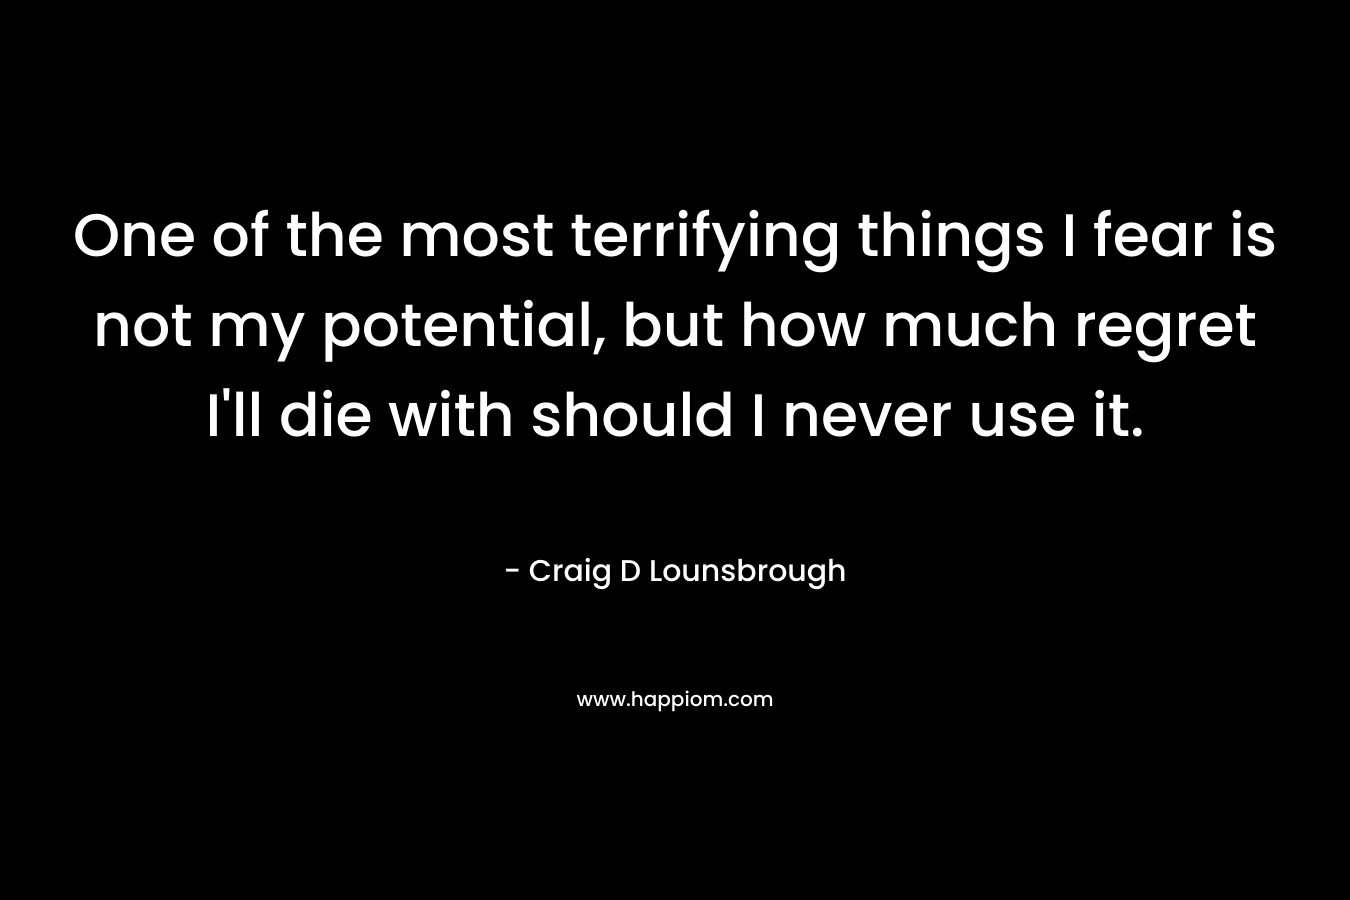 One of the most terrifying things I fear is not my potential, but how much regret I'll die with should I never use it.